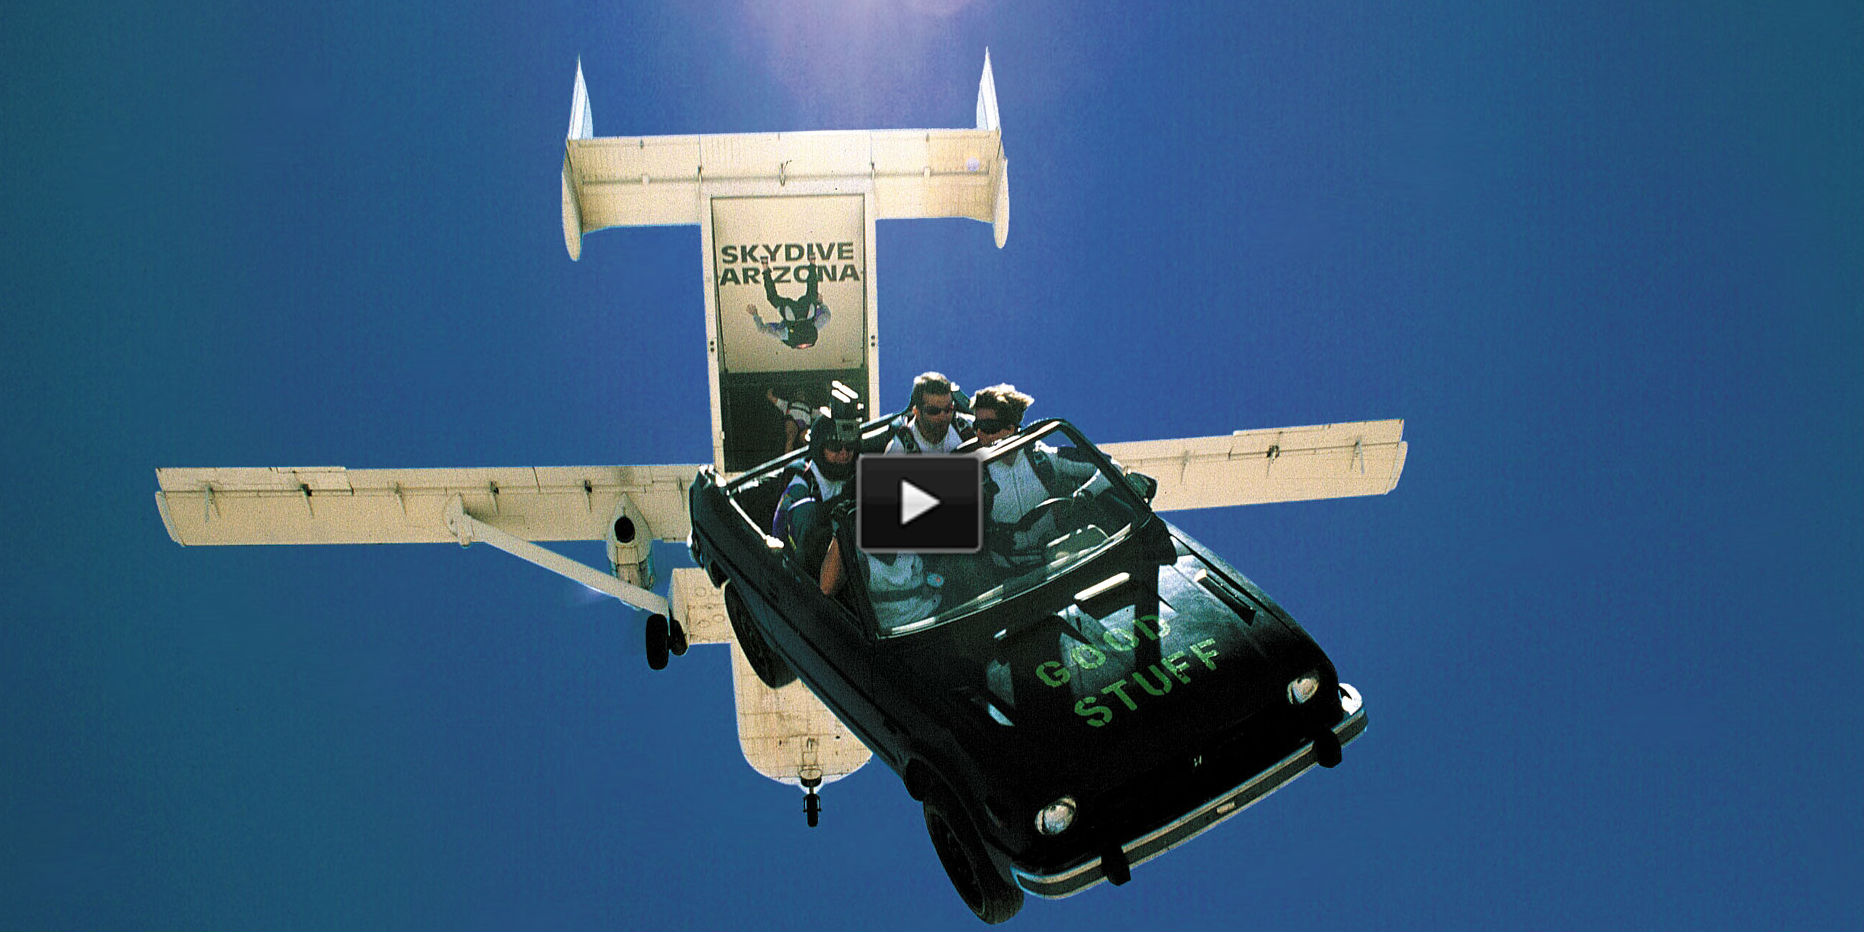 skydiving in a car airplane